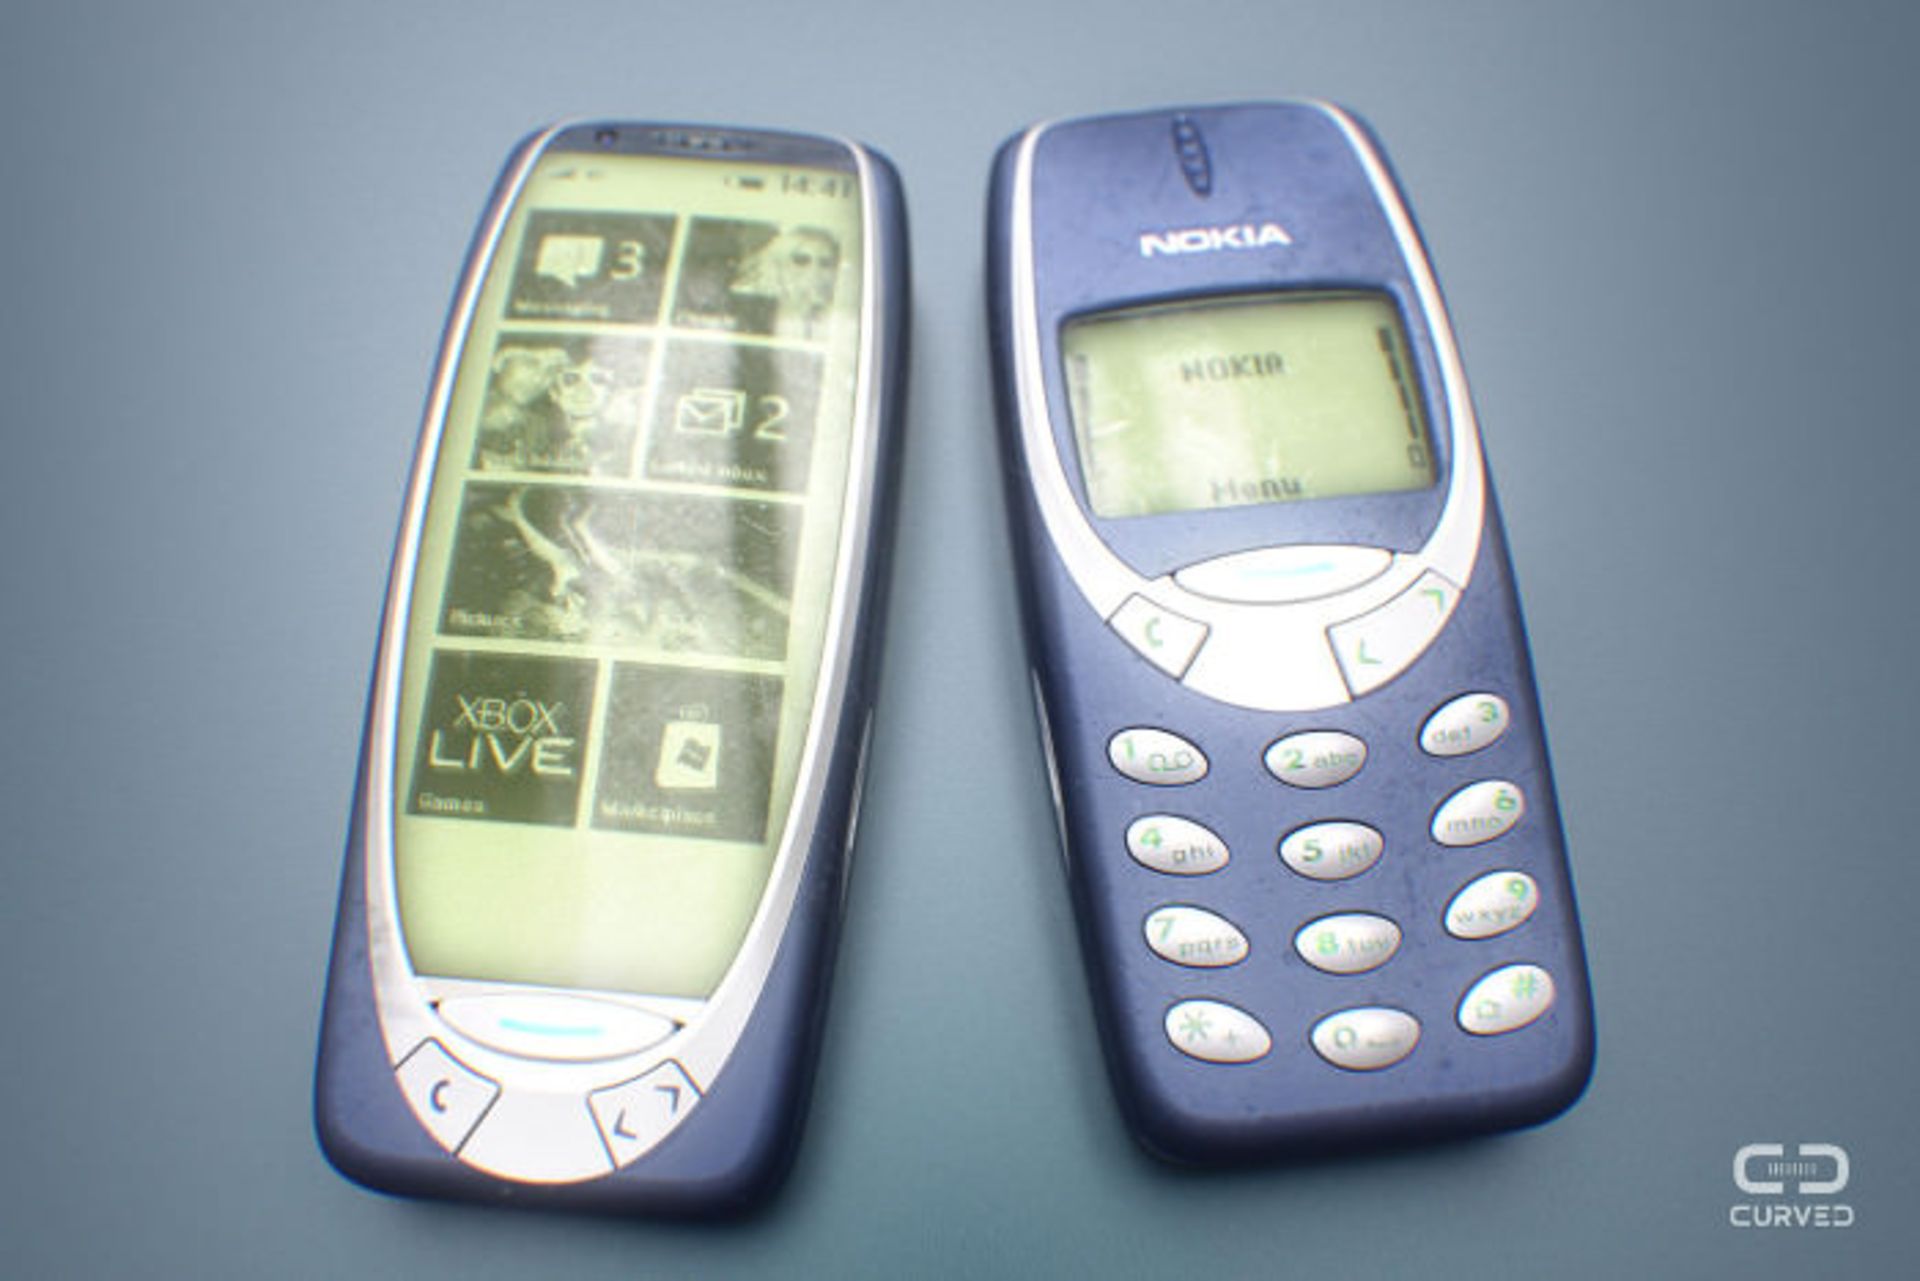 What-if-featurephones-were-smart